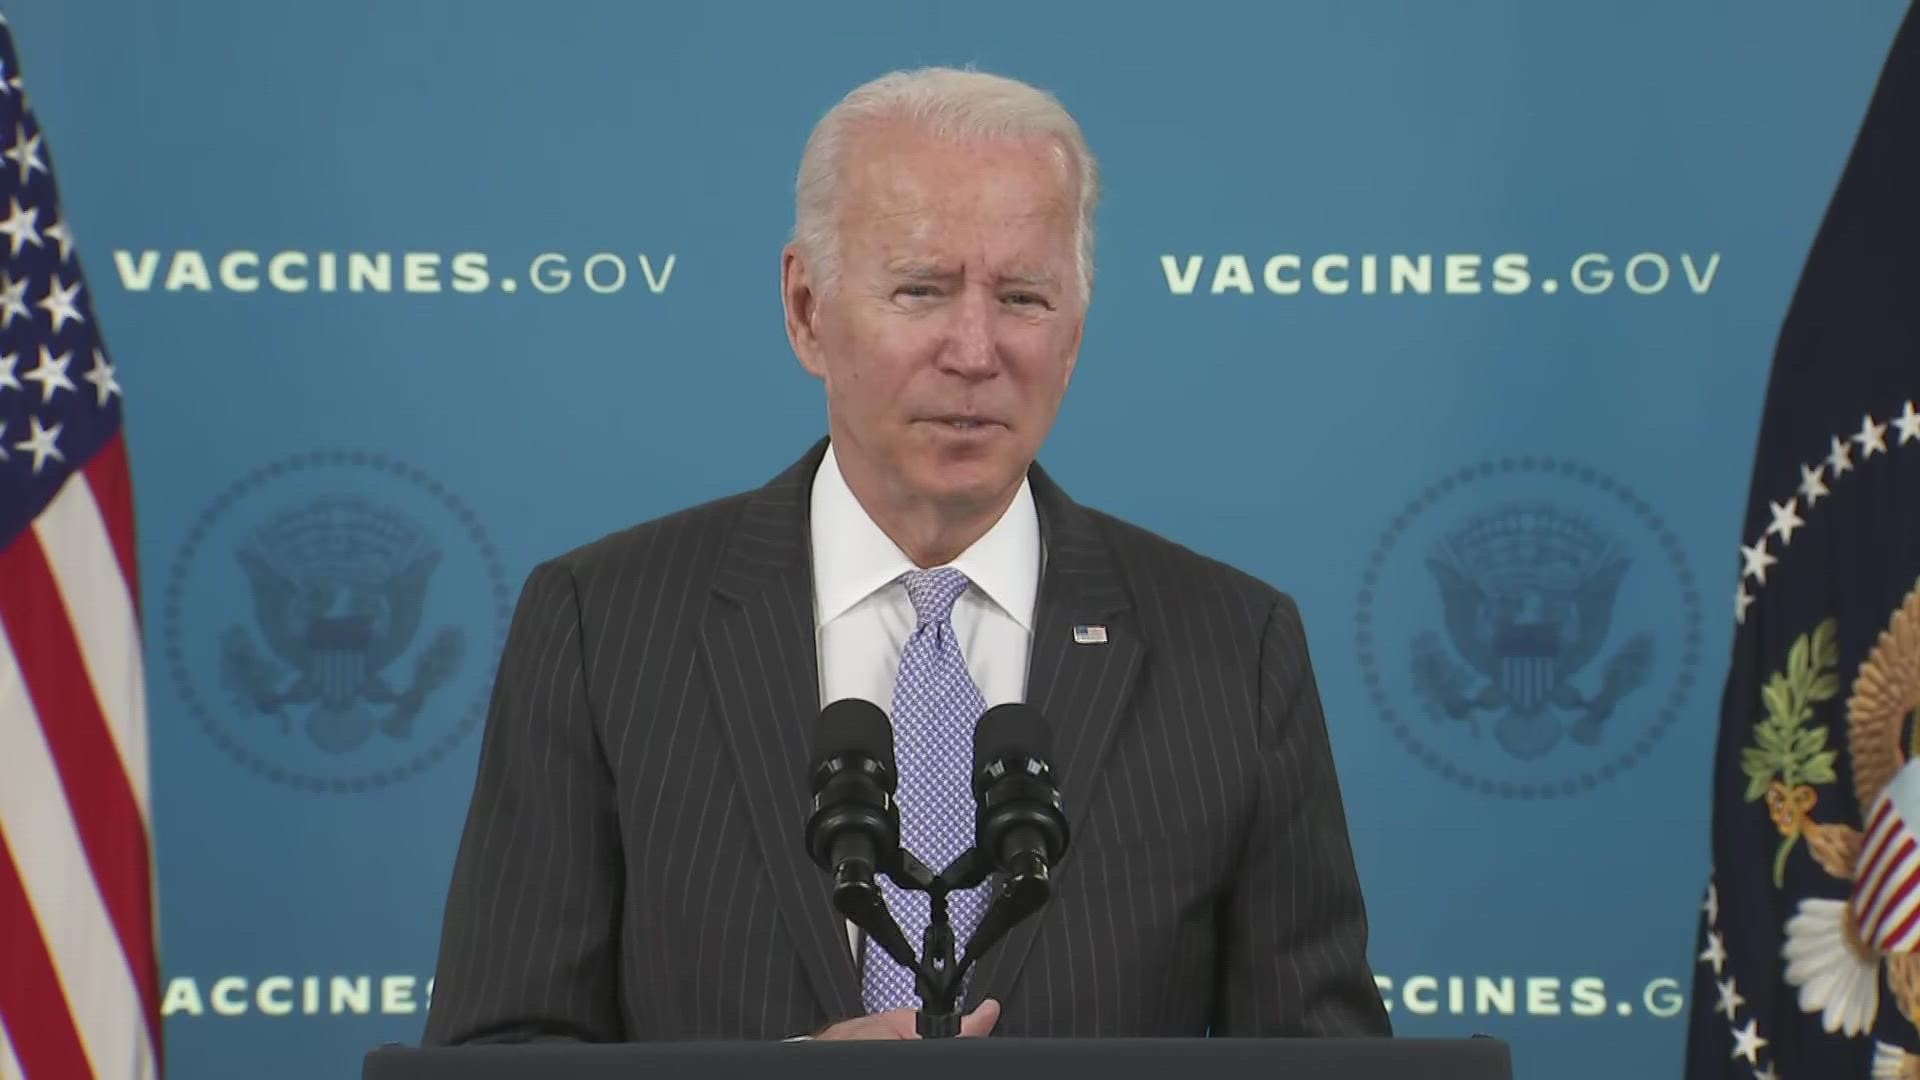 While speaking about COVID-19 vaccines for kids from 5 to 11 years old, Biden also urged eligible seniors to get a booster dose.